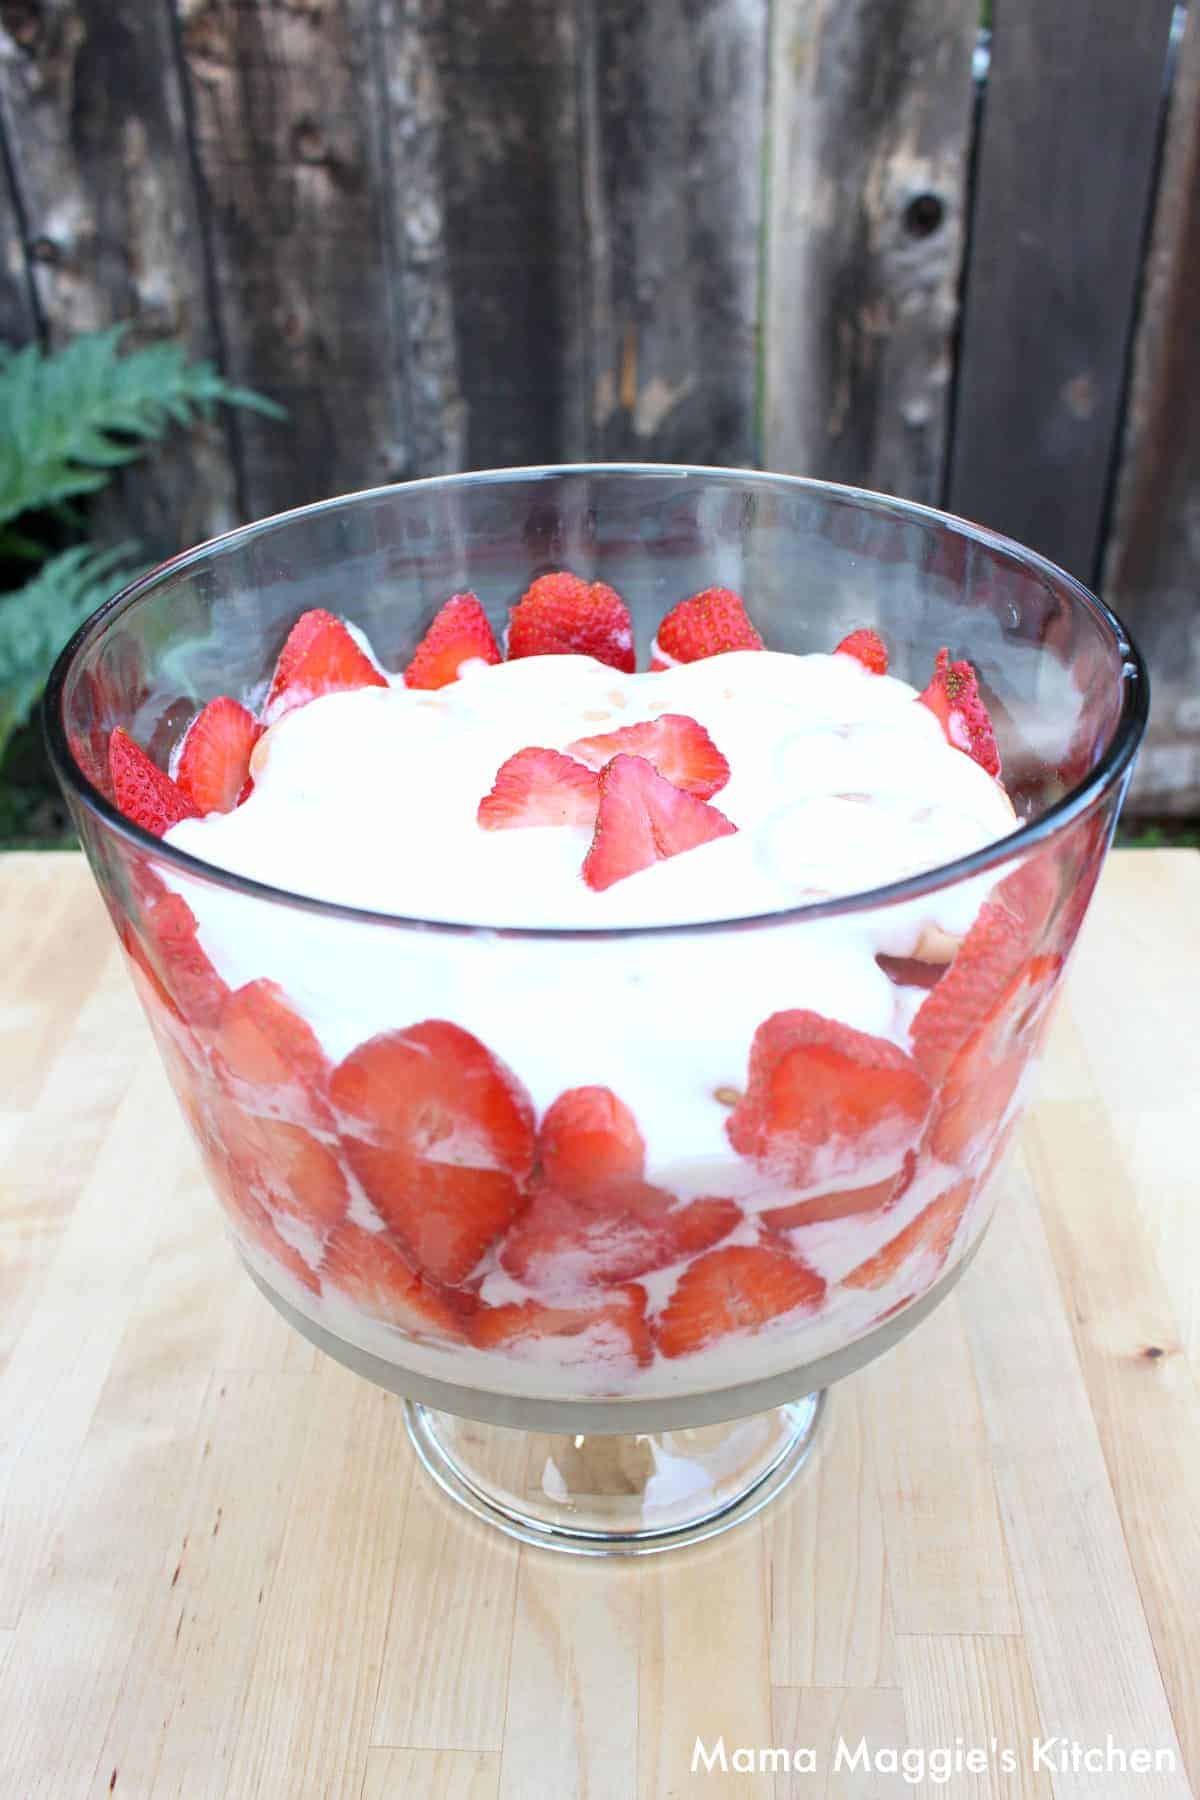 A Carlota de Fresa trifle with a wooden fence and green branch in the background.